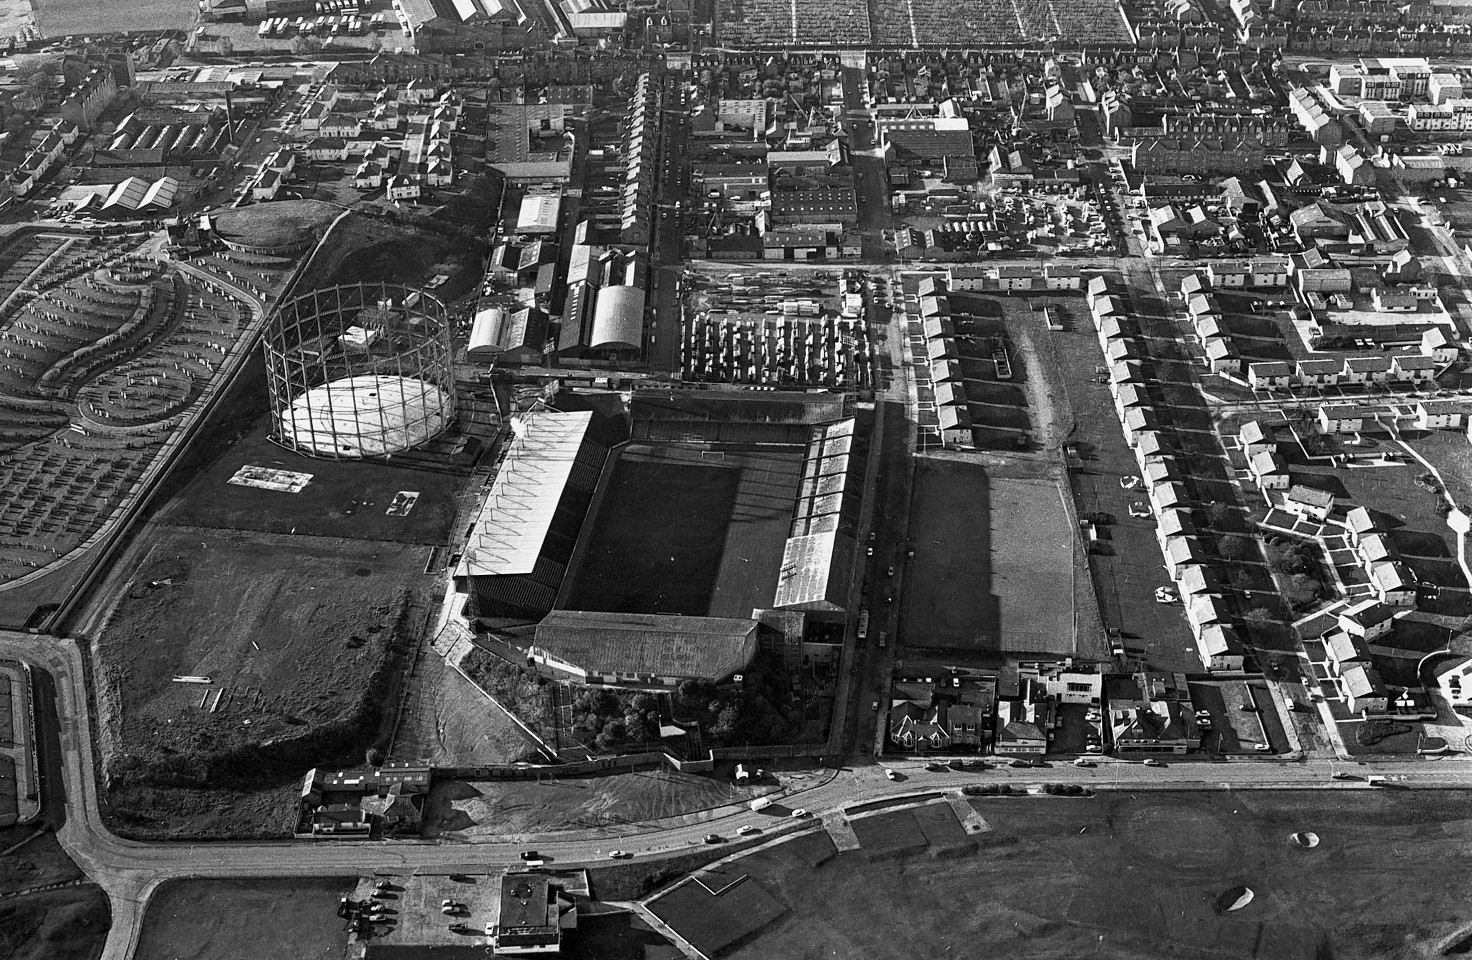 iew looking west in 1984 over Pittodrie Stadium